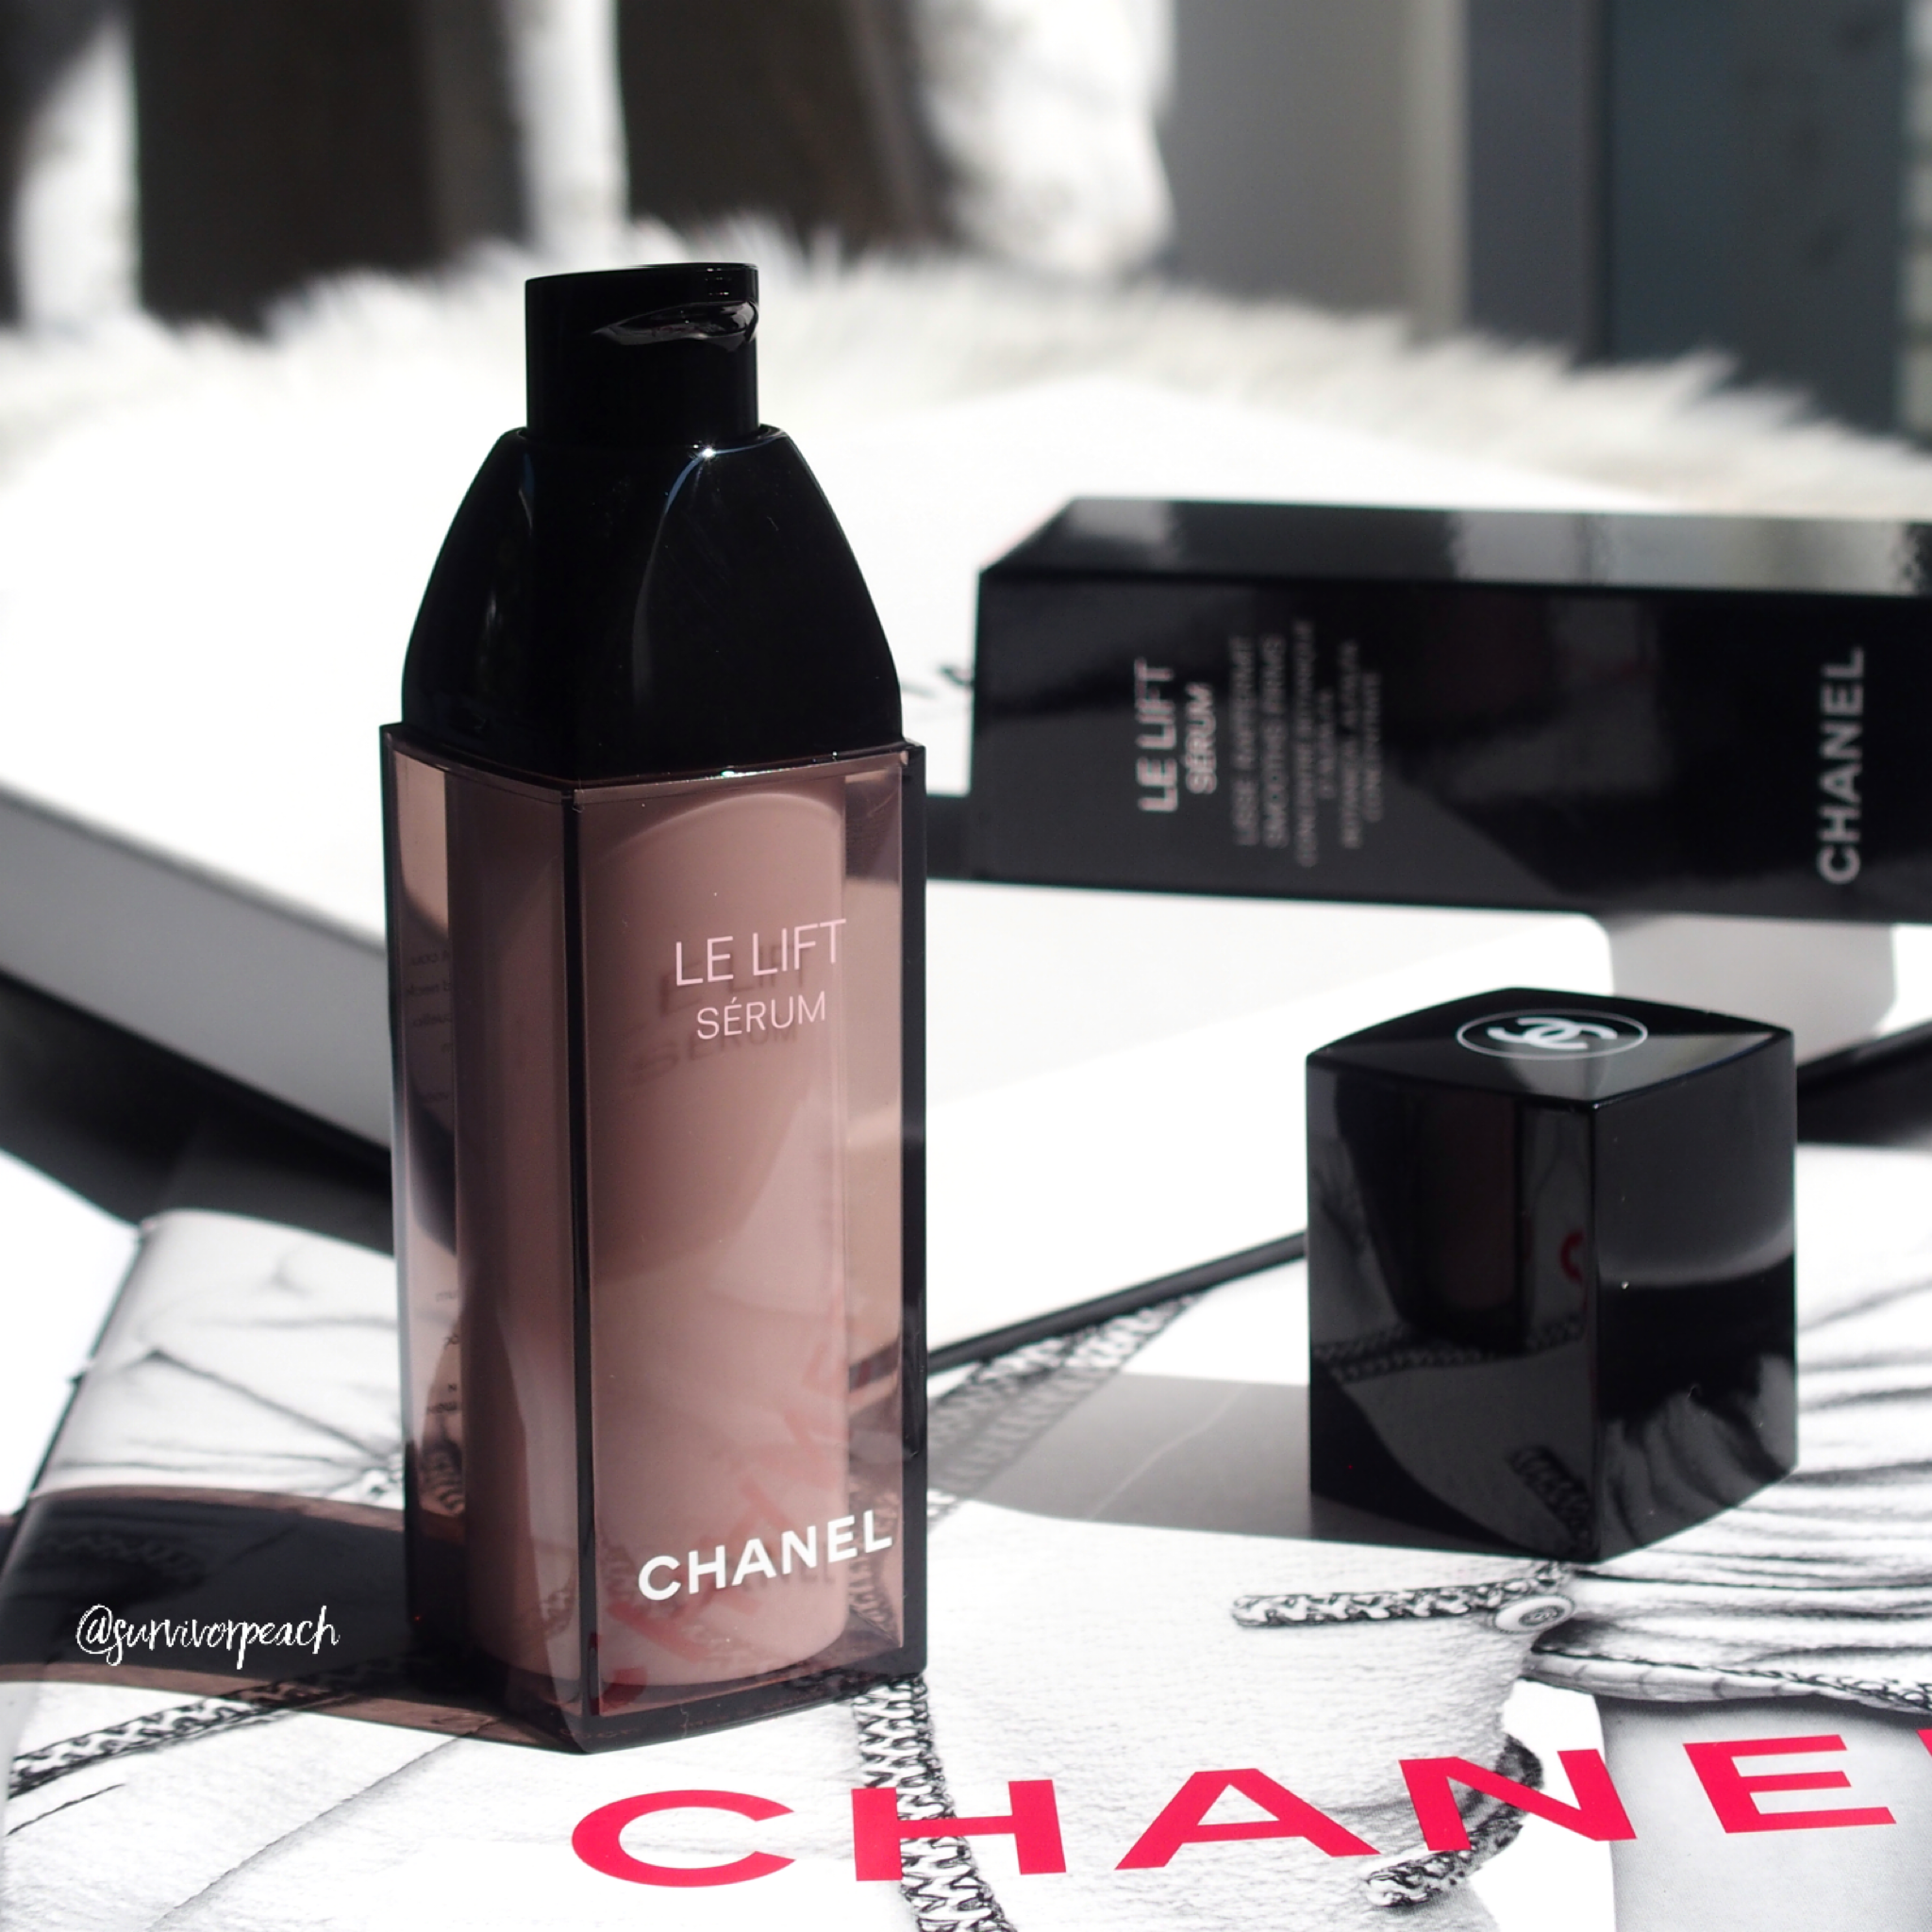 Chanel Skincare Review: Hydra Beauty Lotion, Gel Creme, Overnight